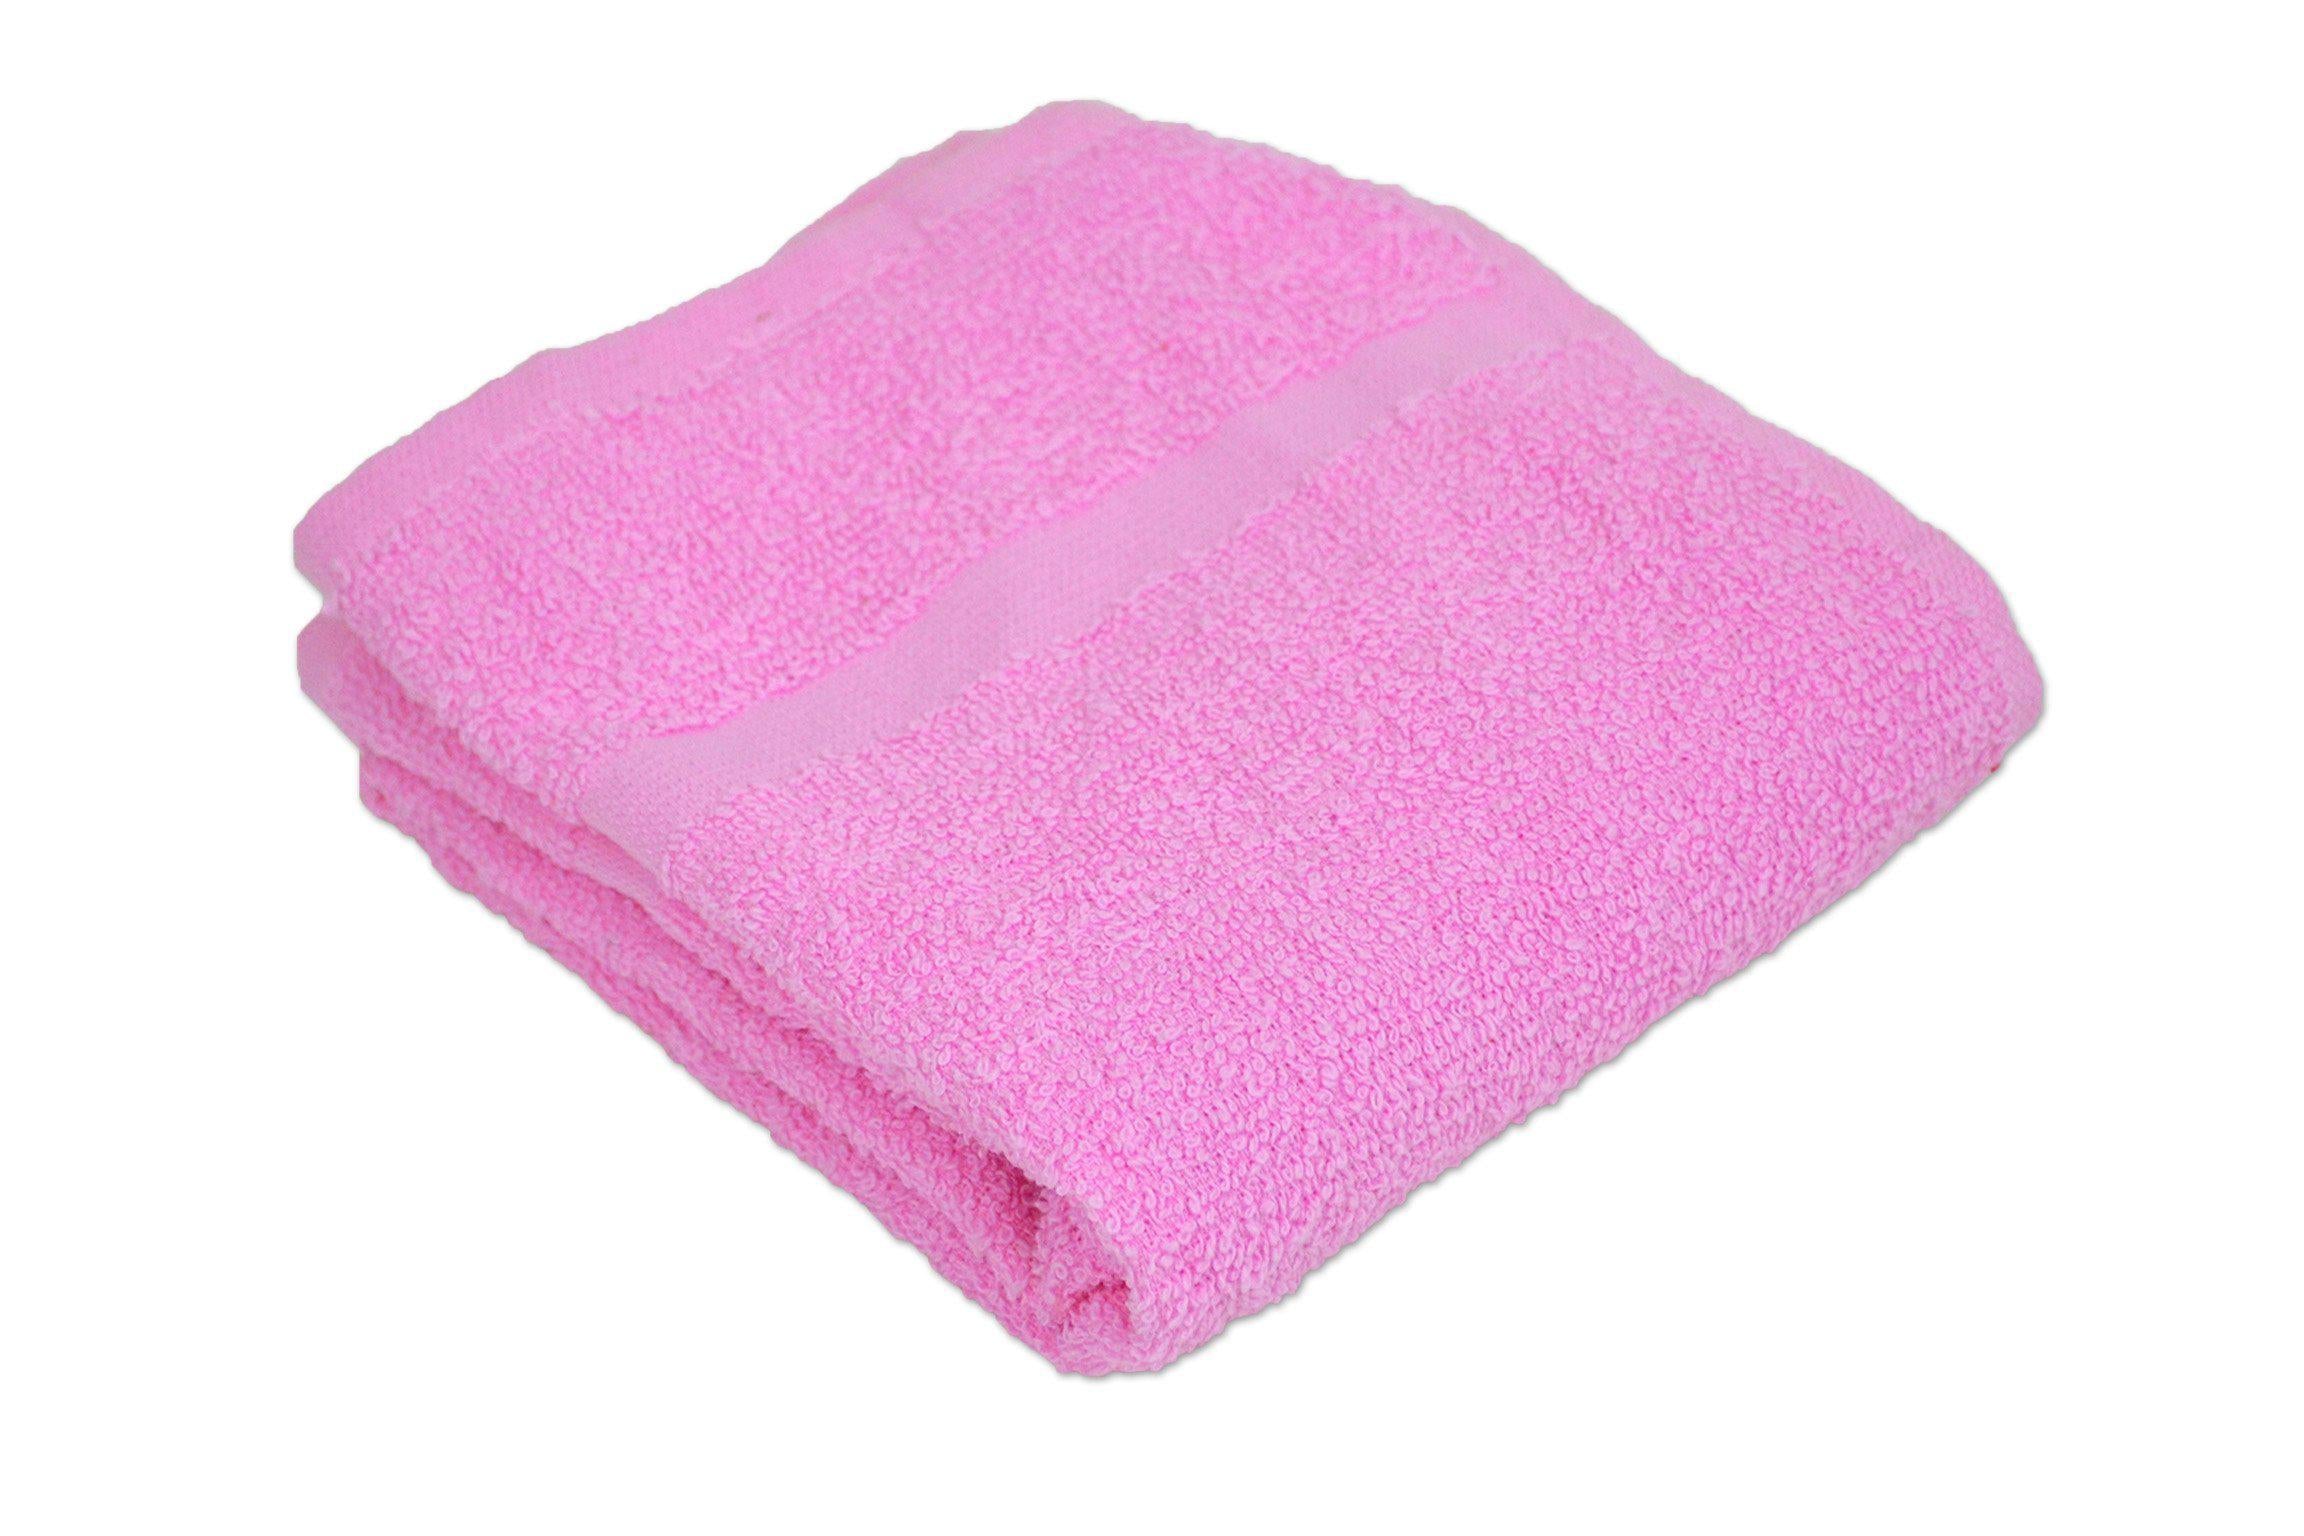 Disposable Towels for Nail Salon or Foot Reflexology - The Outcall Spa